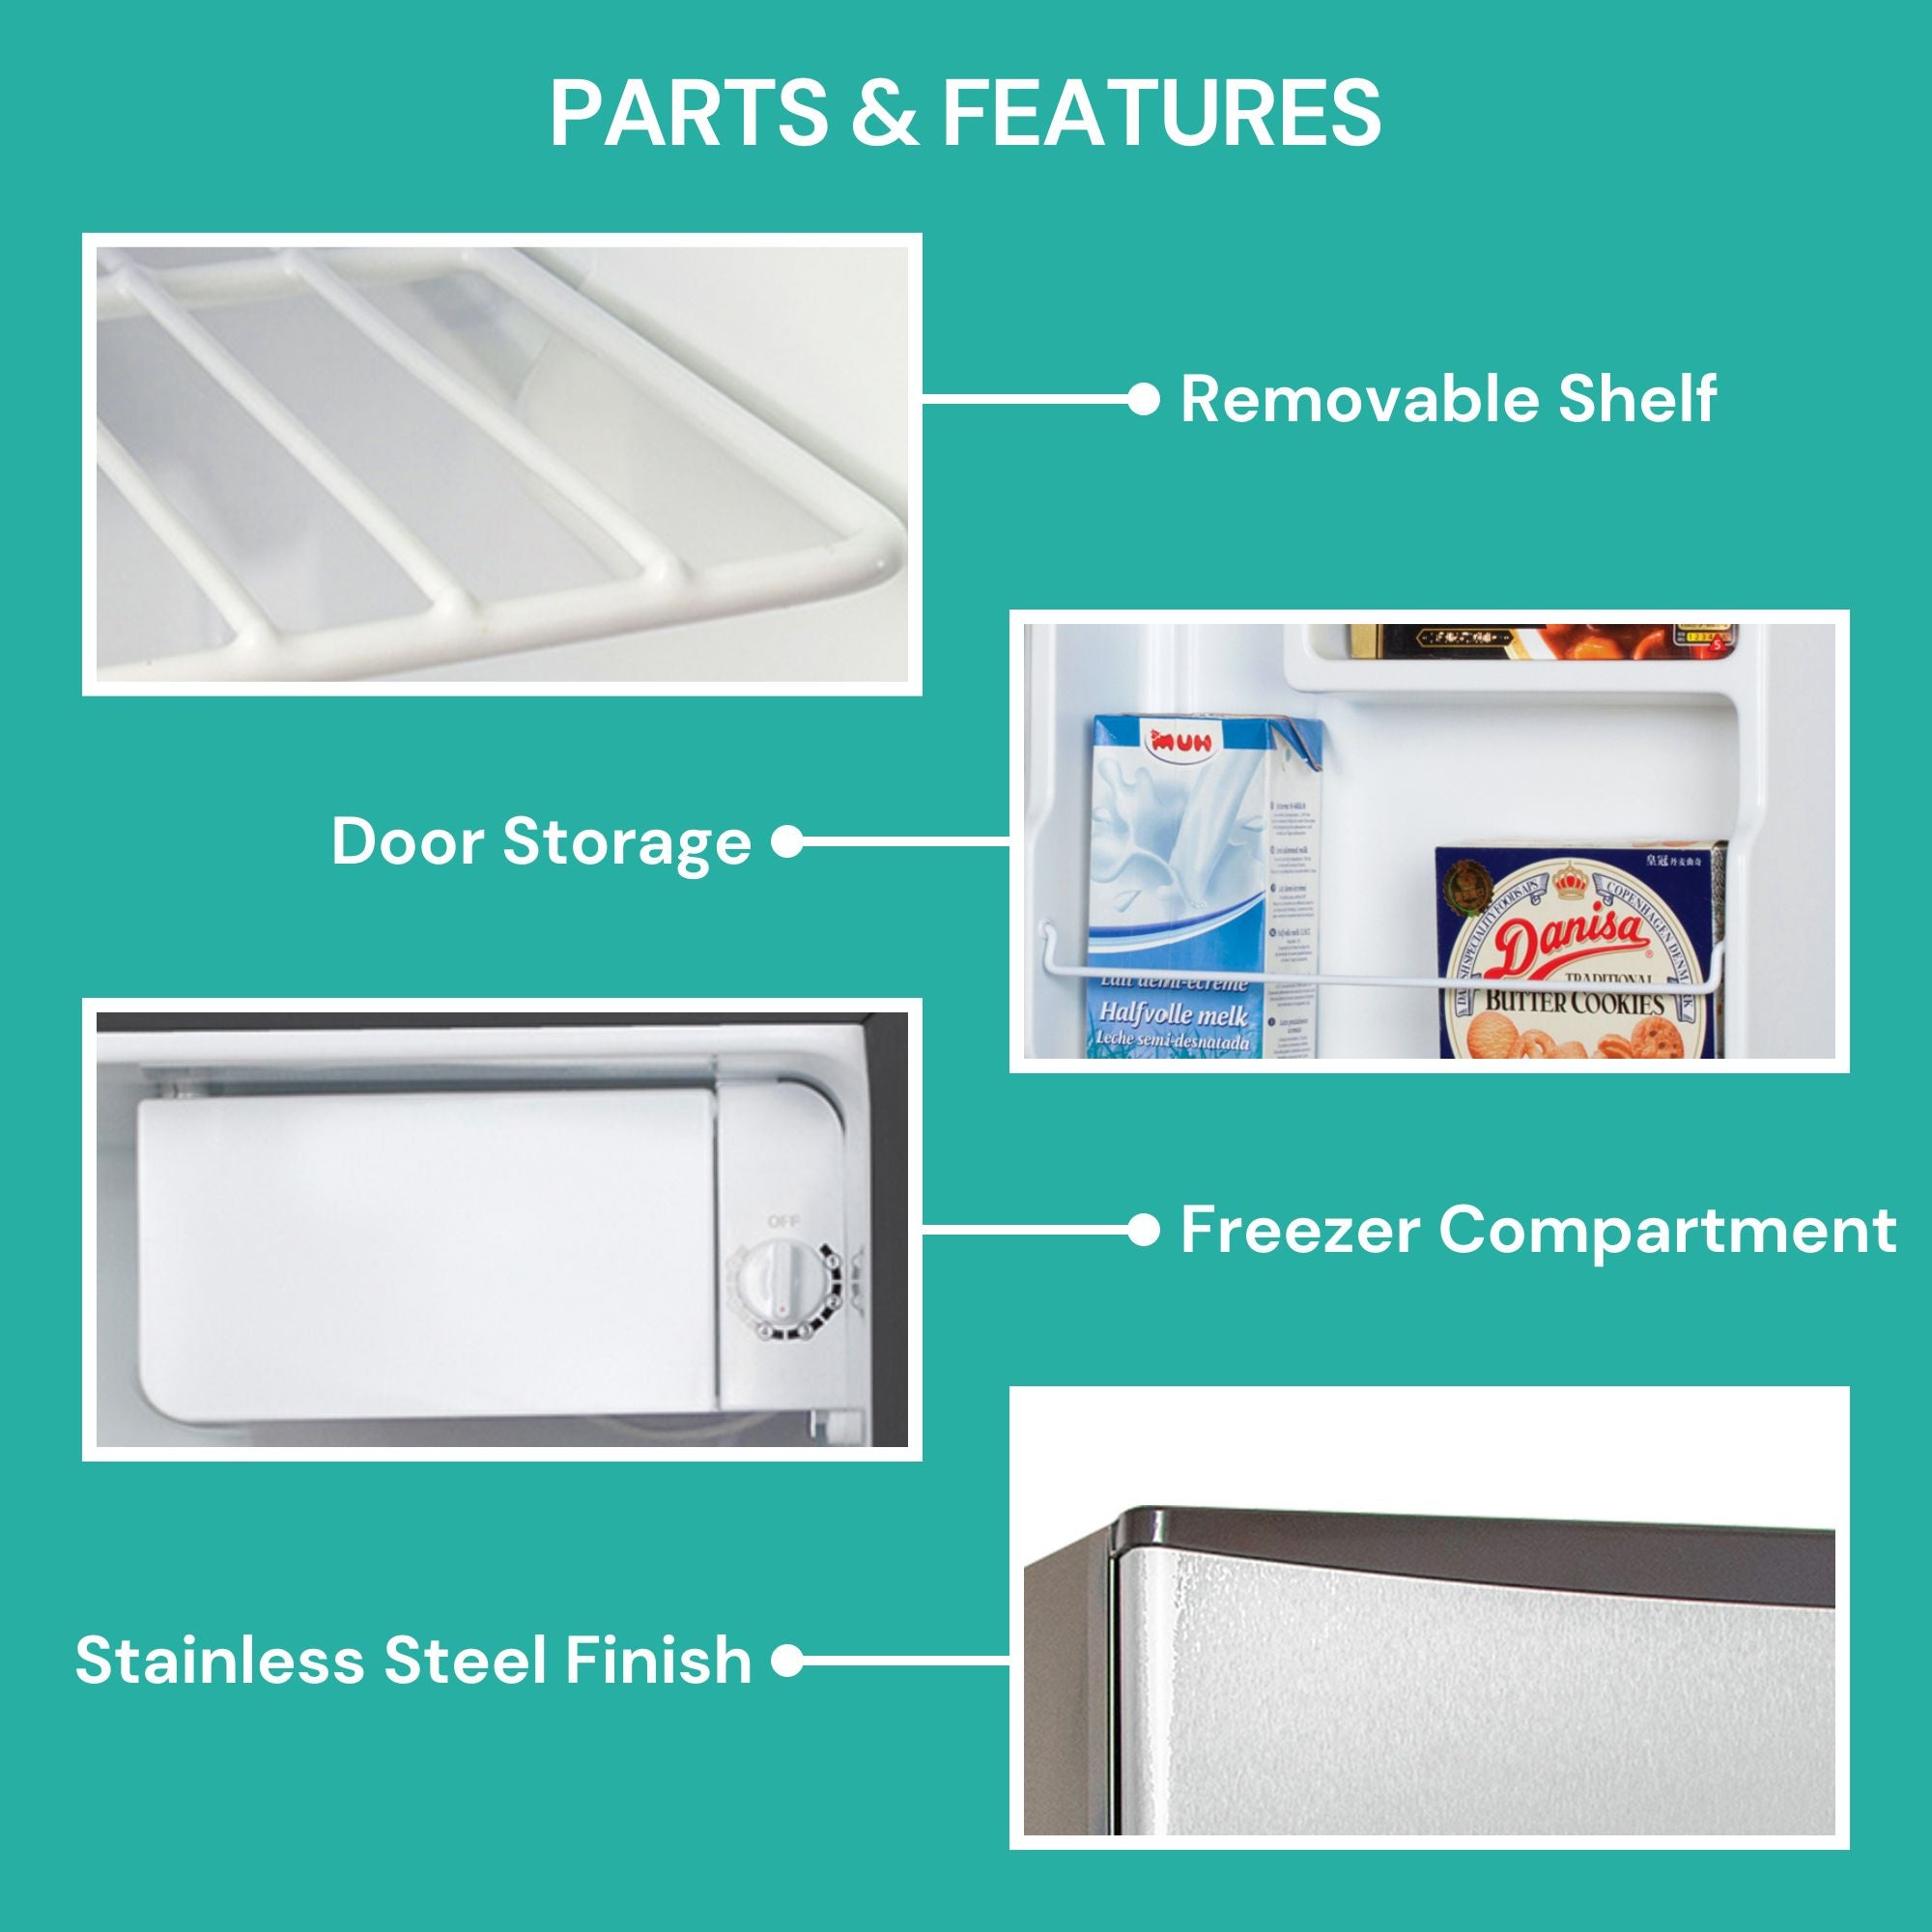 Closeup images of parts and features, labeled: Removable shelf; door storage; freezer compartment; stainless steel exterior